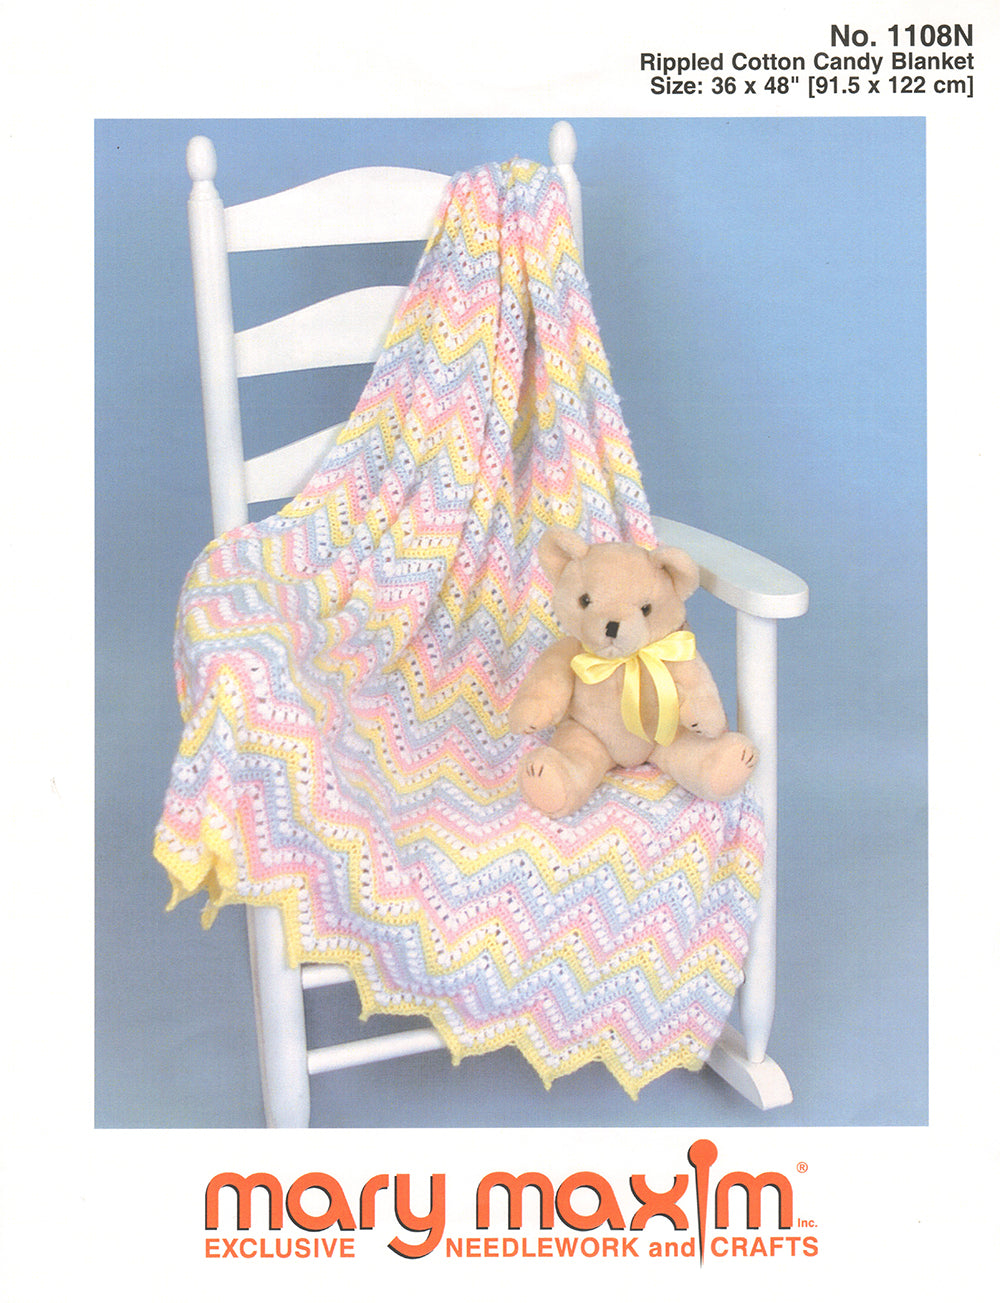 Rippled Cotton Candy Blanket Pattern